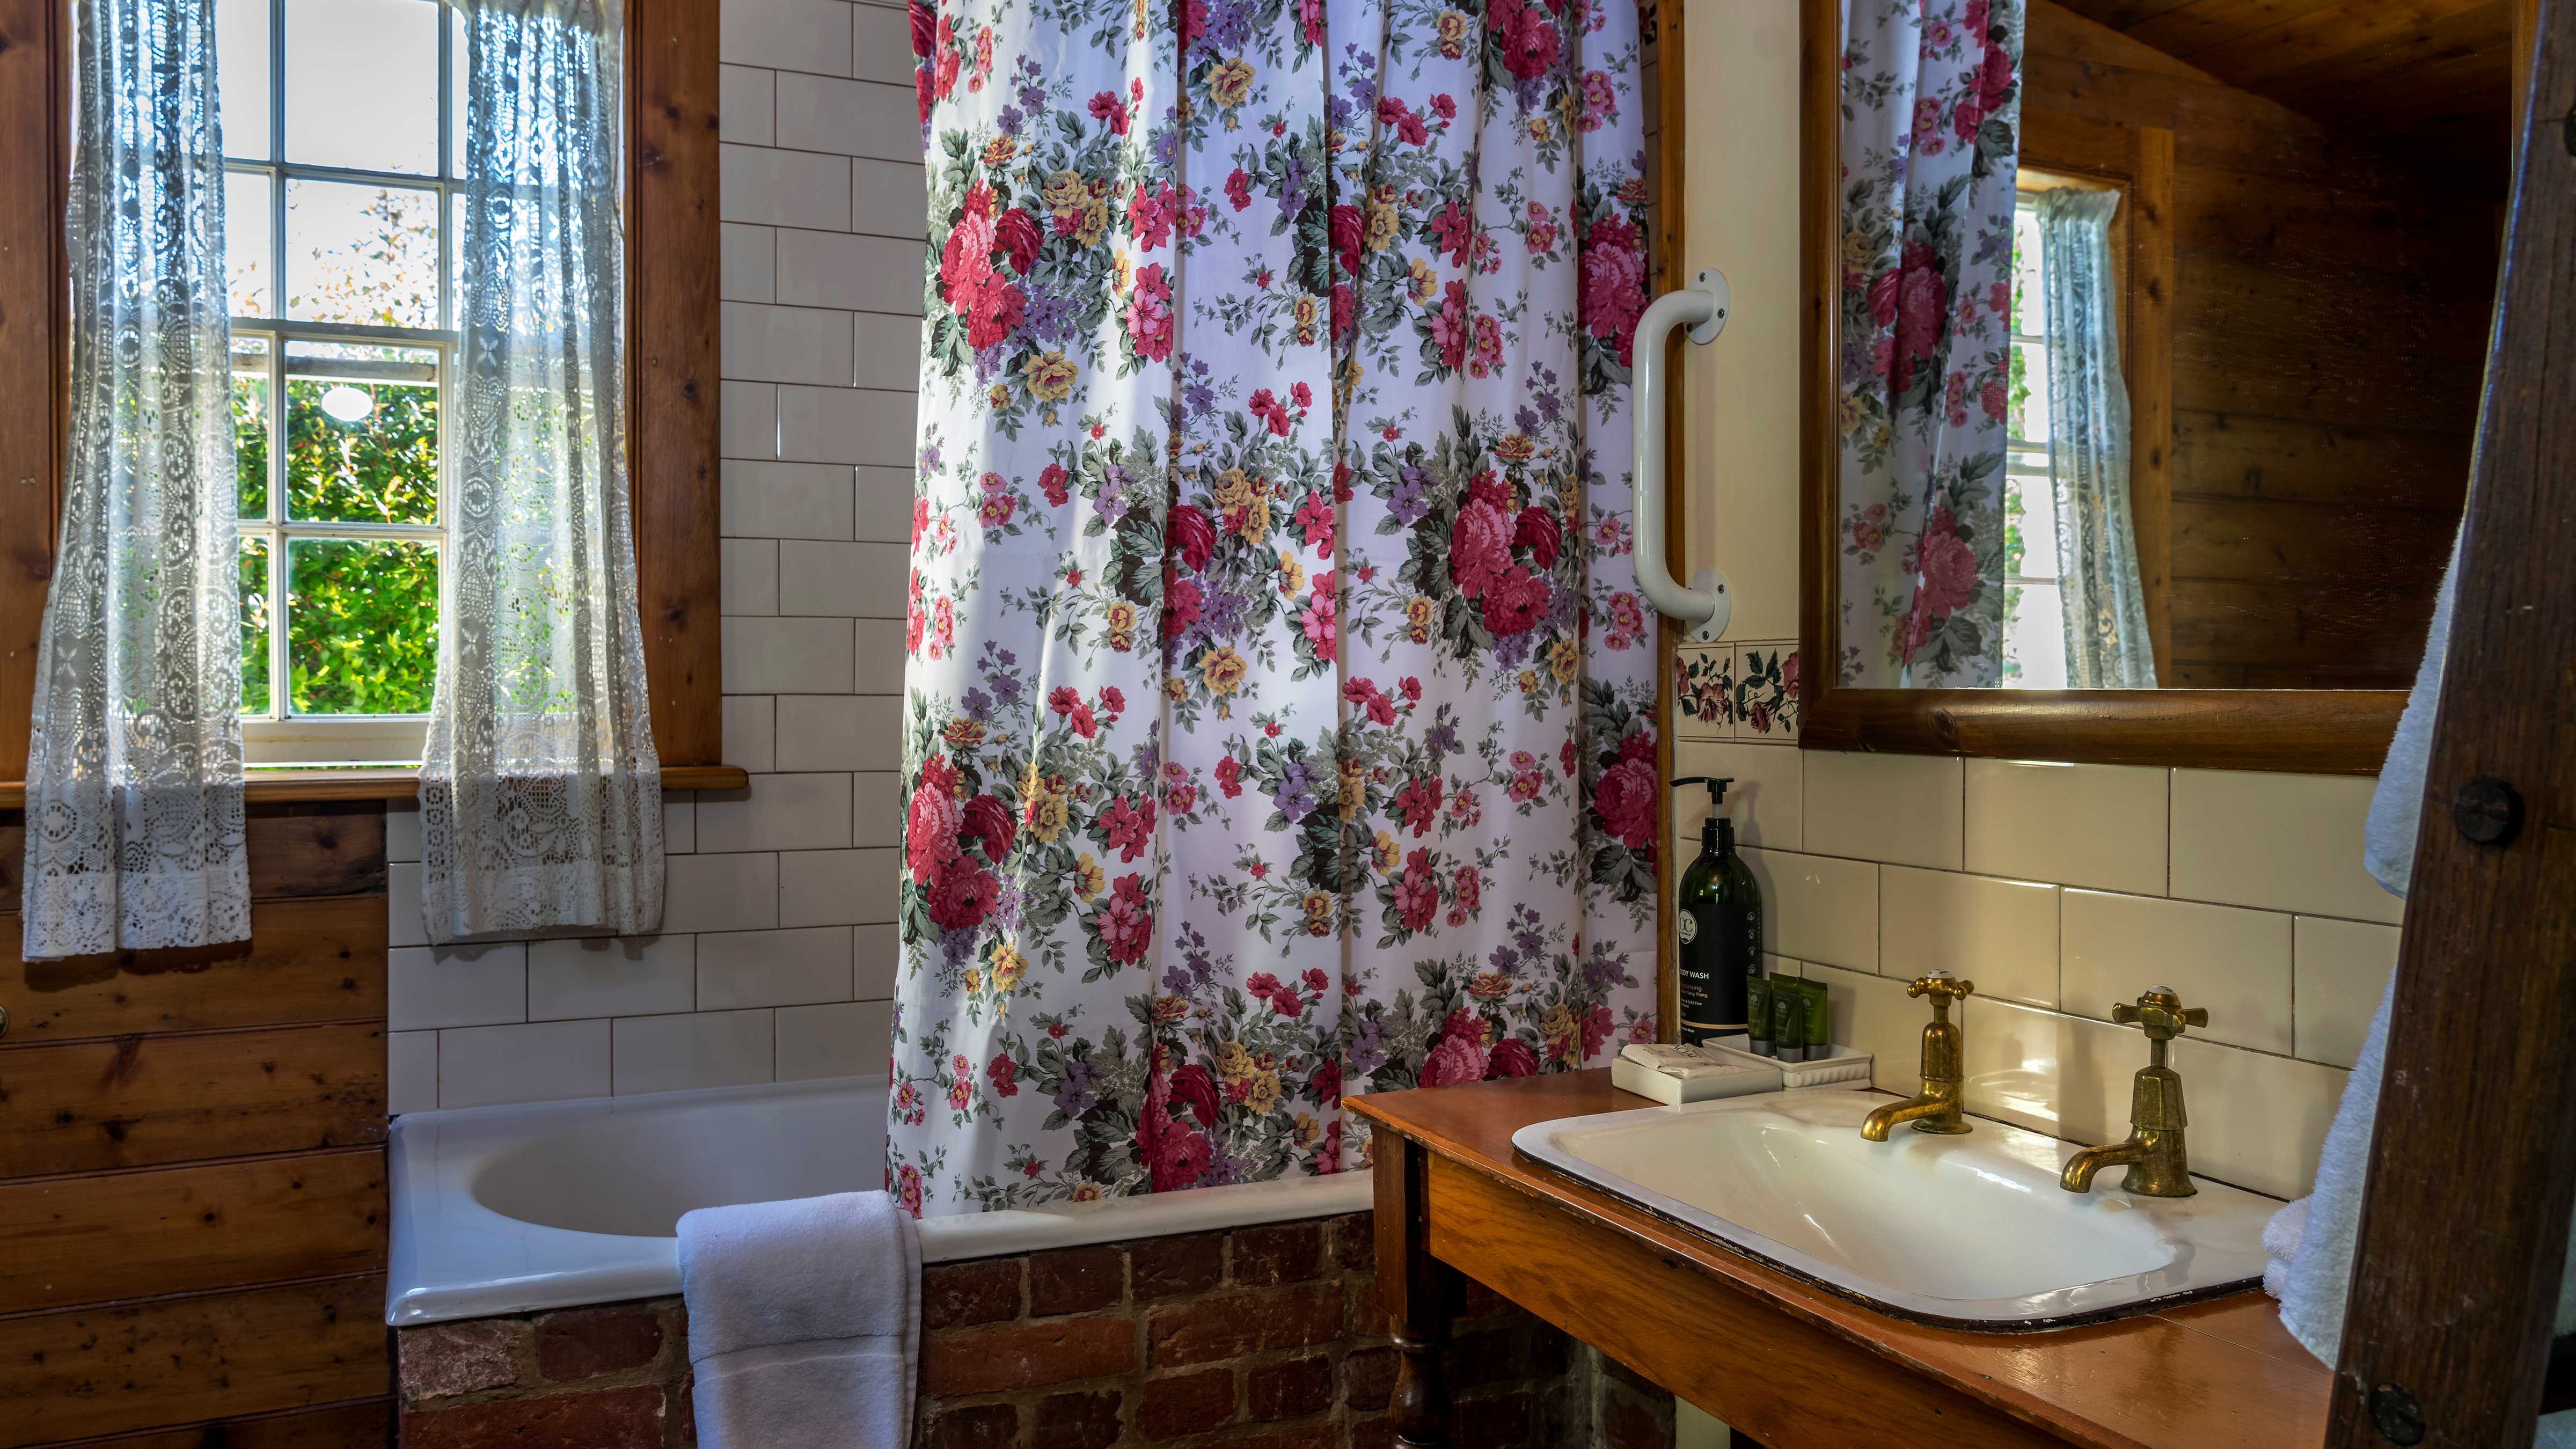 An old fashioned bath is enclosed with bricks and a floral shower curtain hangs in front of a white tiled wall. A Georgian paned window has lace curtains hanging with a view to green foliage. On the left is a timber washstand with a white basin and two pillar taps with a mirror above. Photo: Rob Burnett.